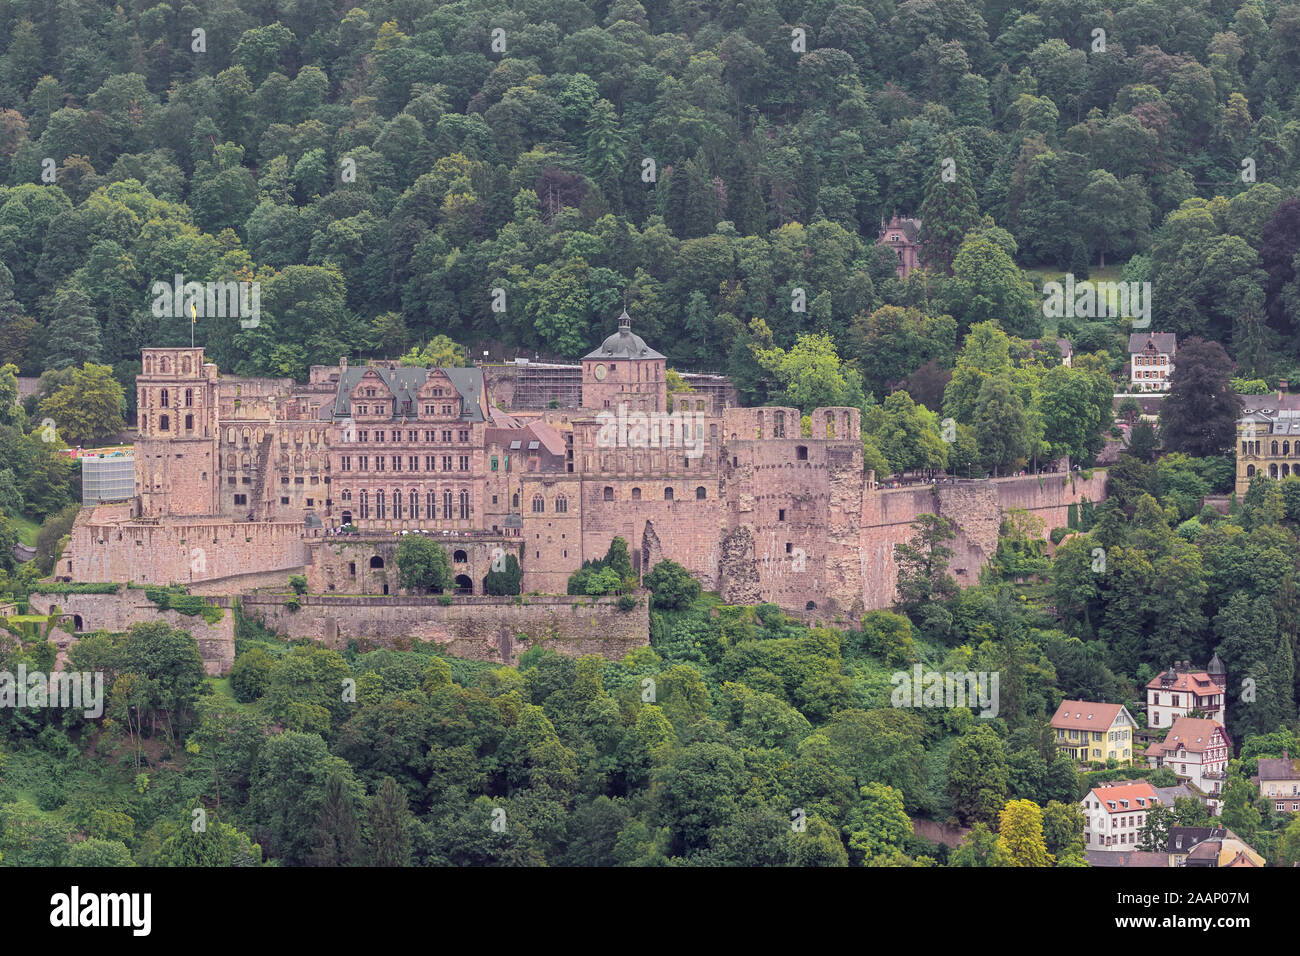 Close up of the Heidelberg castle seen from the Philosoph's path Stock Photo